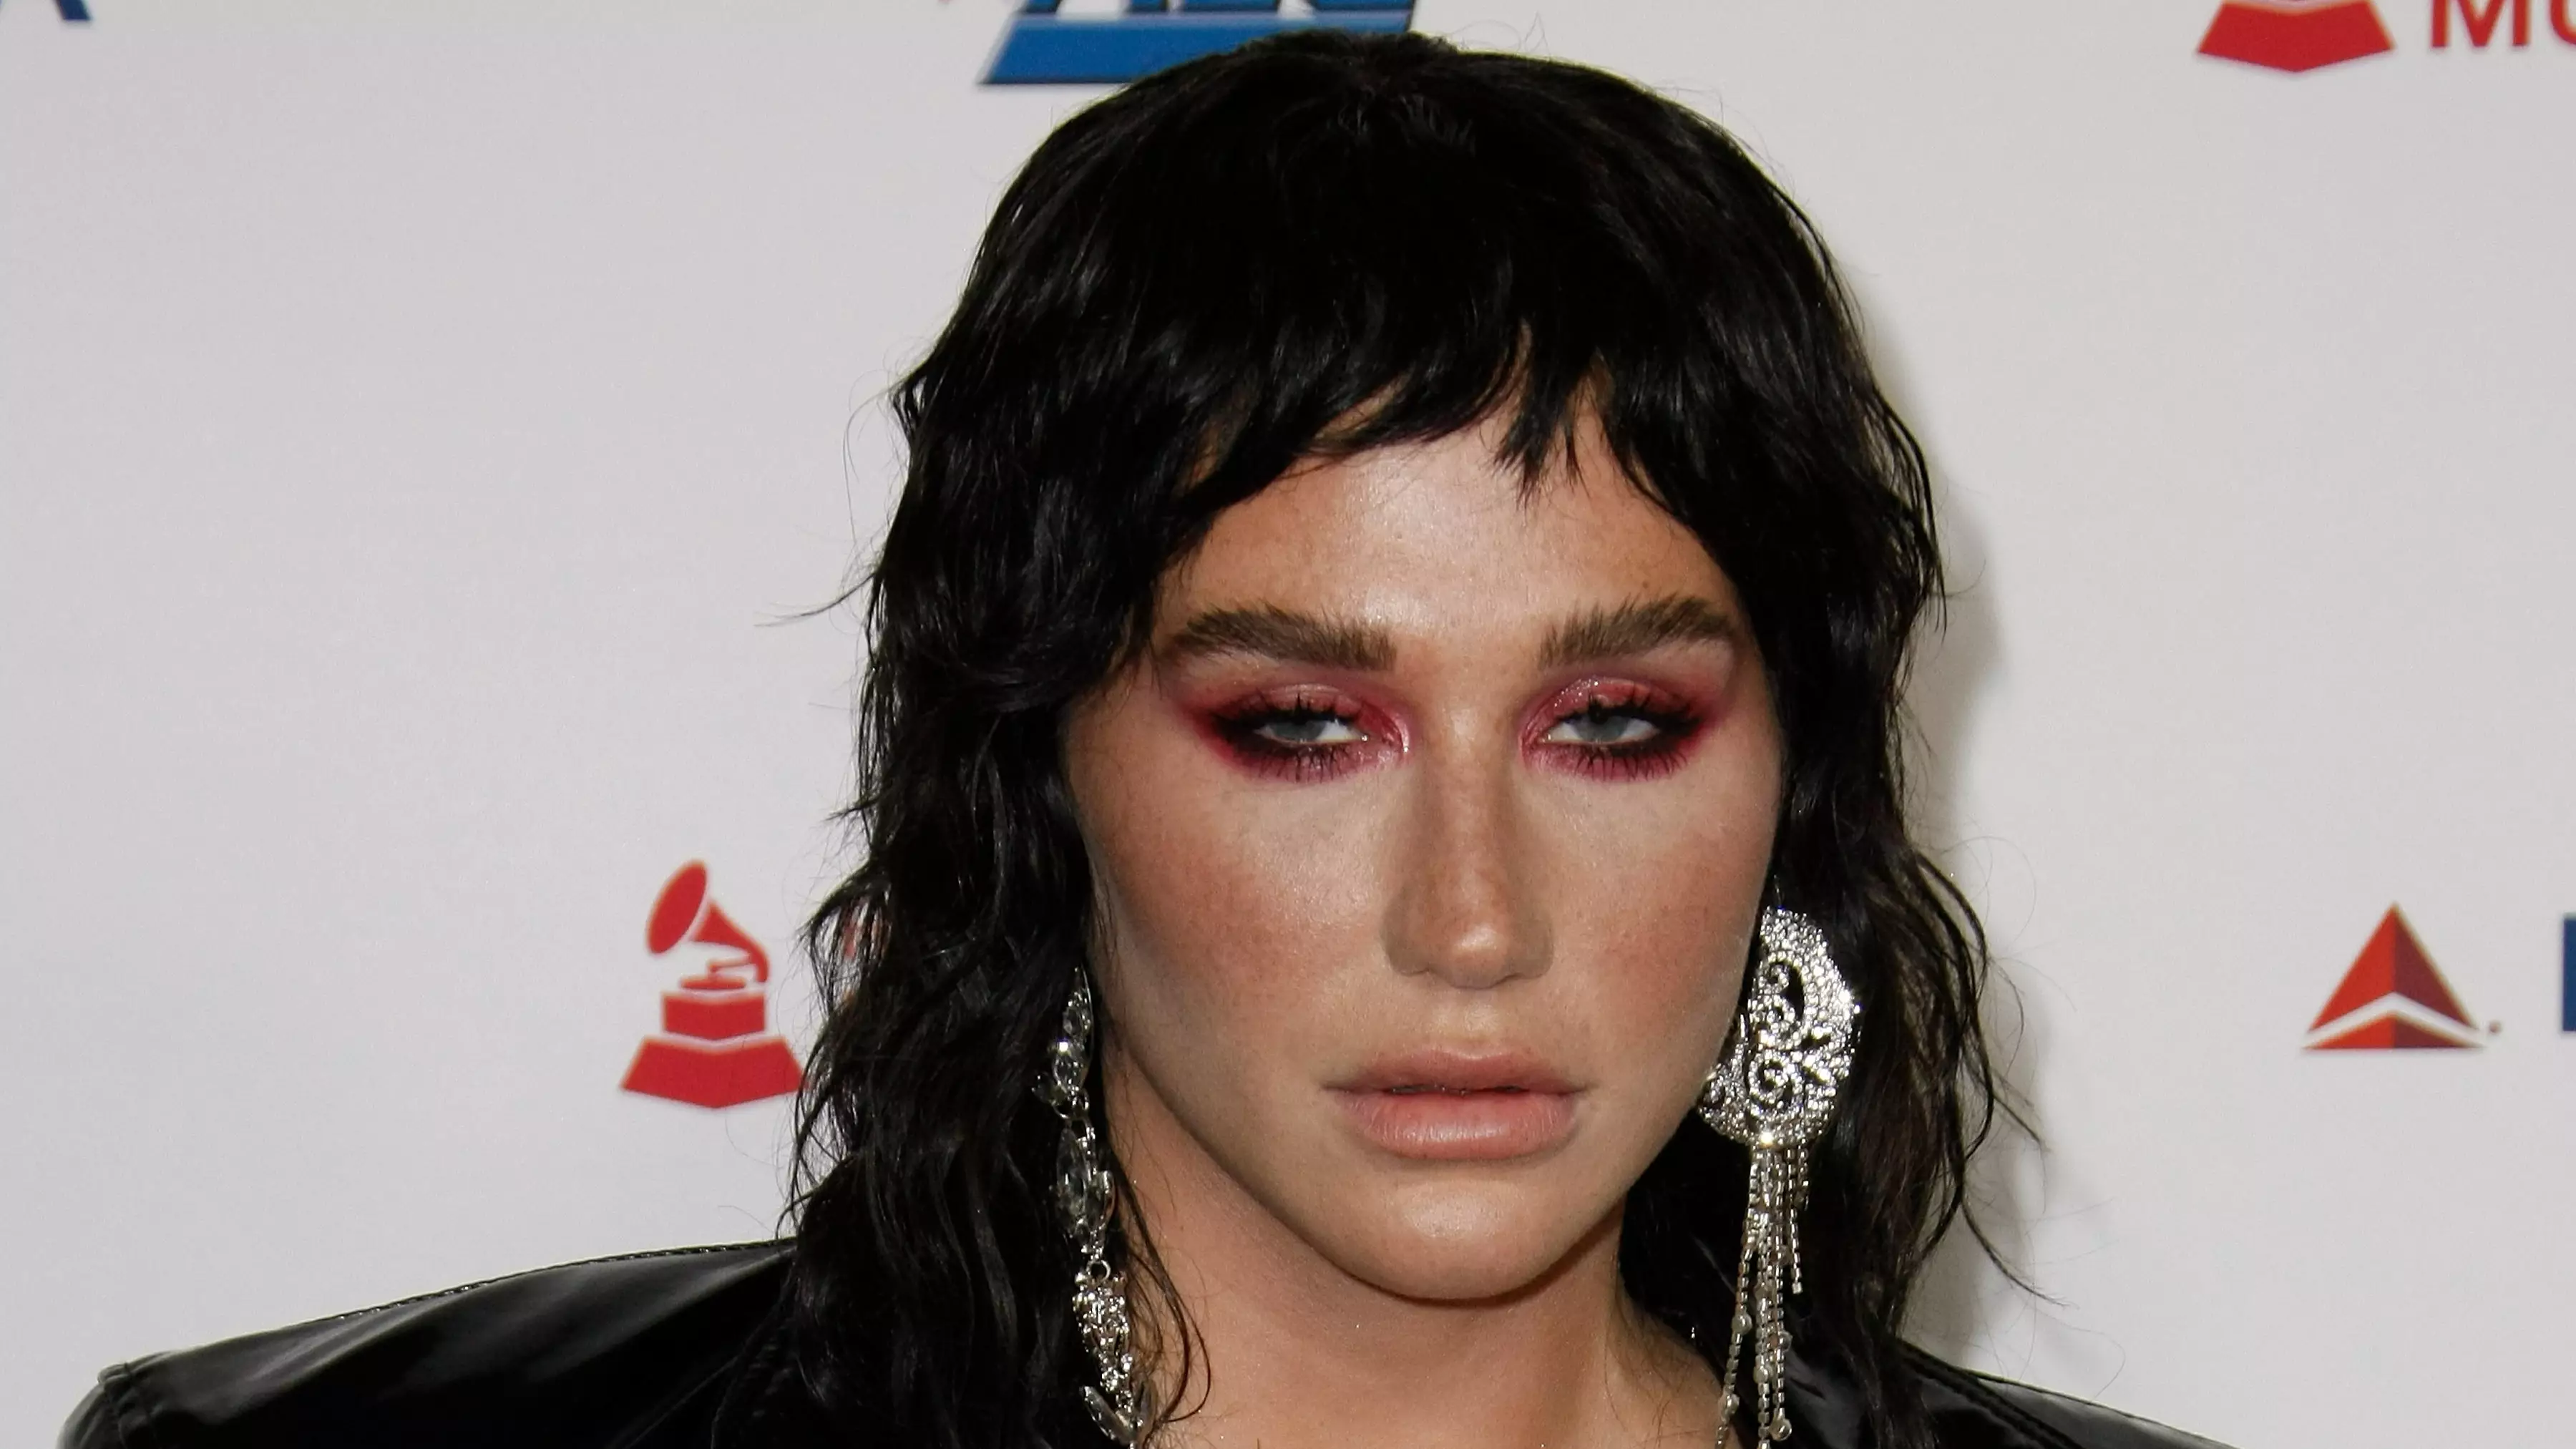 Kesha Shares TikTok About How To Correctly Pronounce Her Name